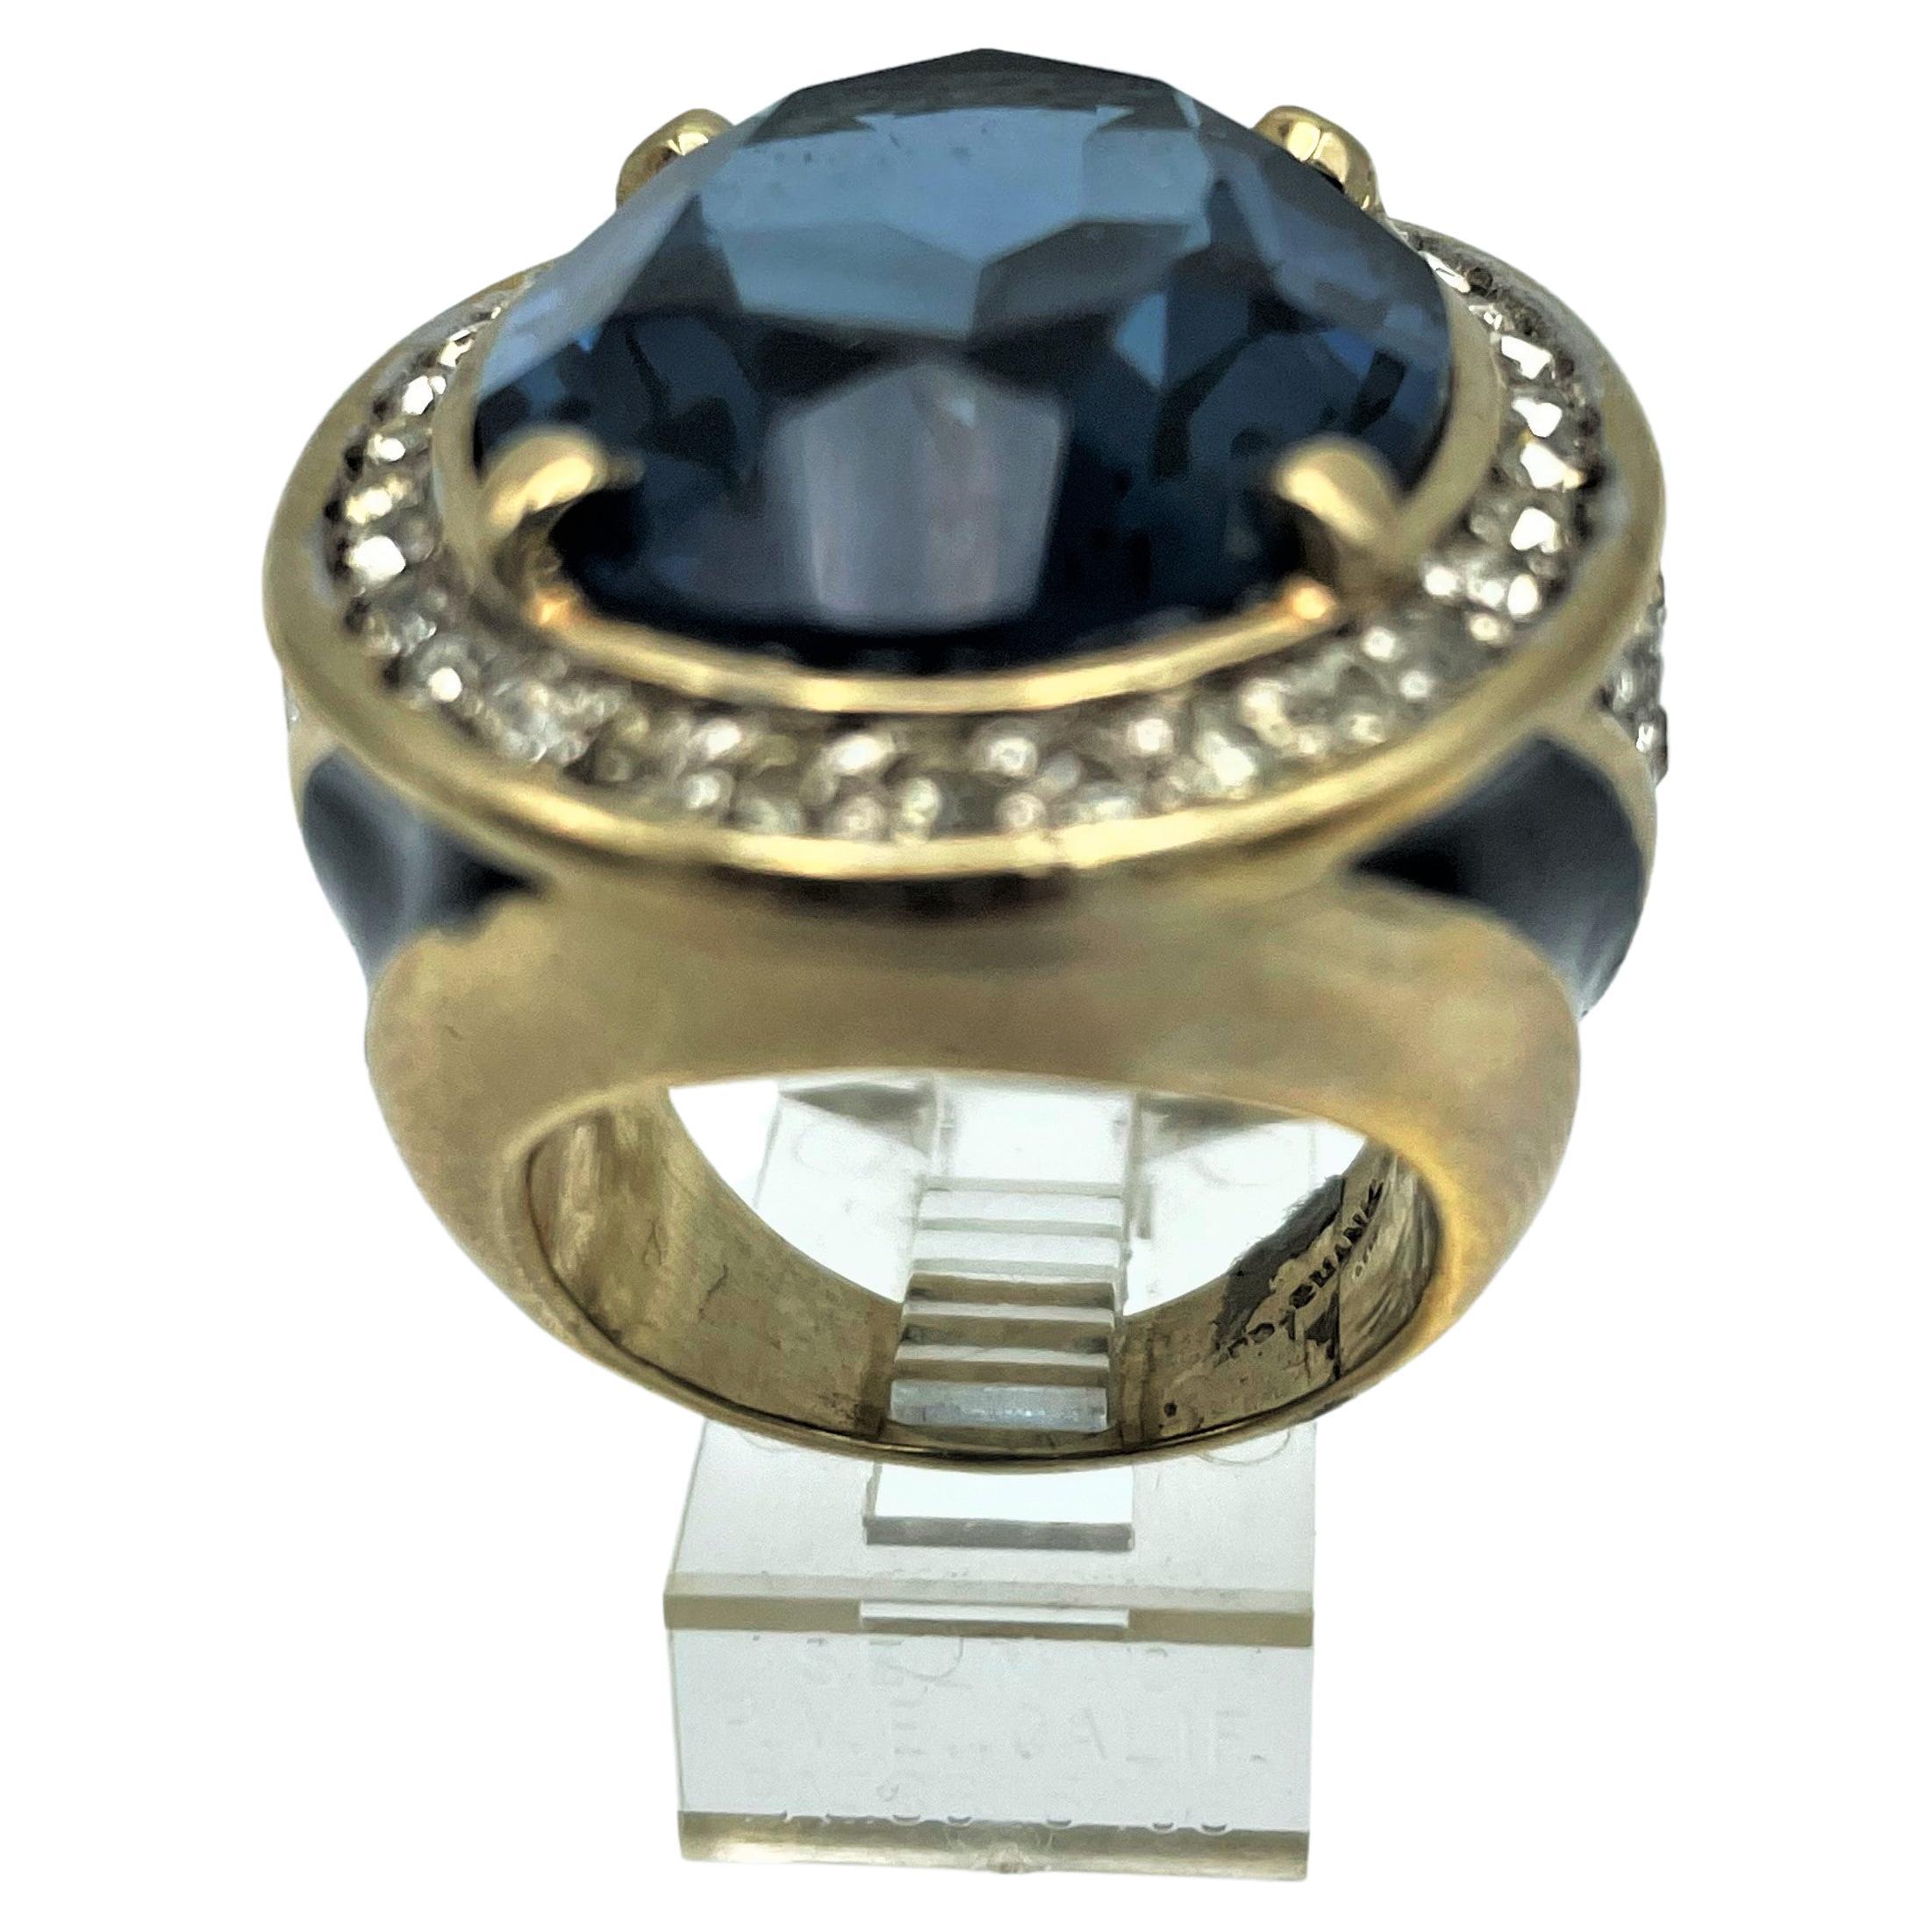 a great cocktail ring by Panetta from the 1970s/80s USA. With a large cut blue rhinestone surrounded by small stones. Laterally blue enamel work and many rhinestones. gold plated

Size 53 mm, US size 6.4 - blue Rhinestone 3.5 cm x 3 cm . Height of